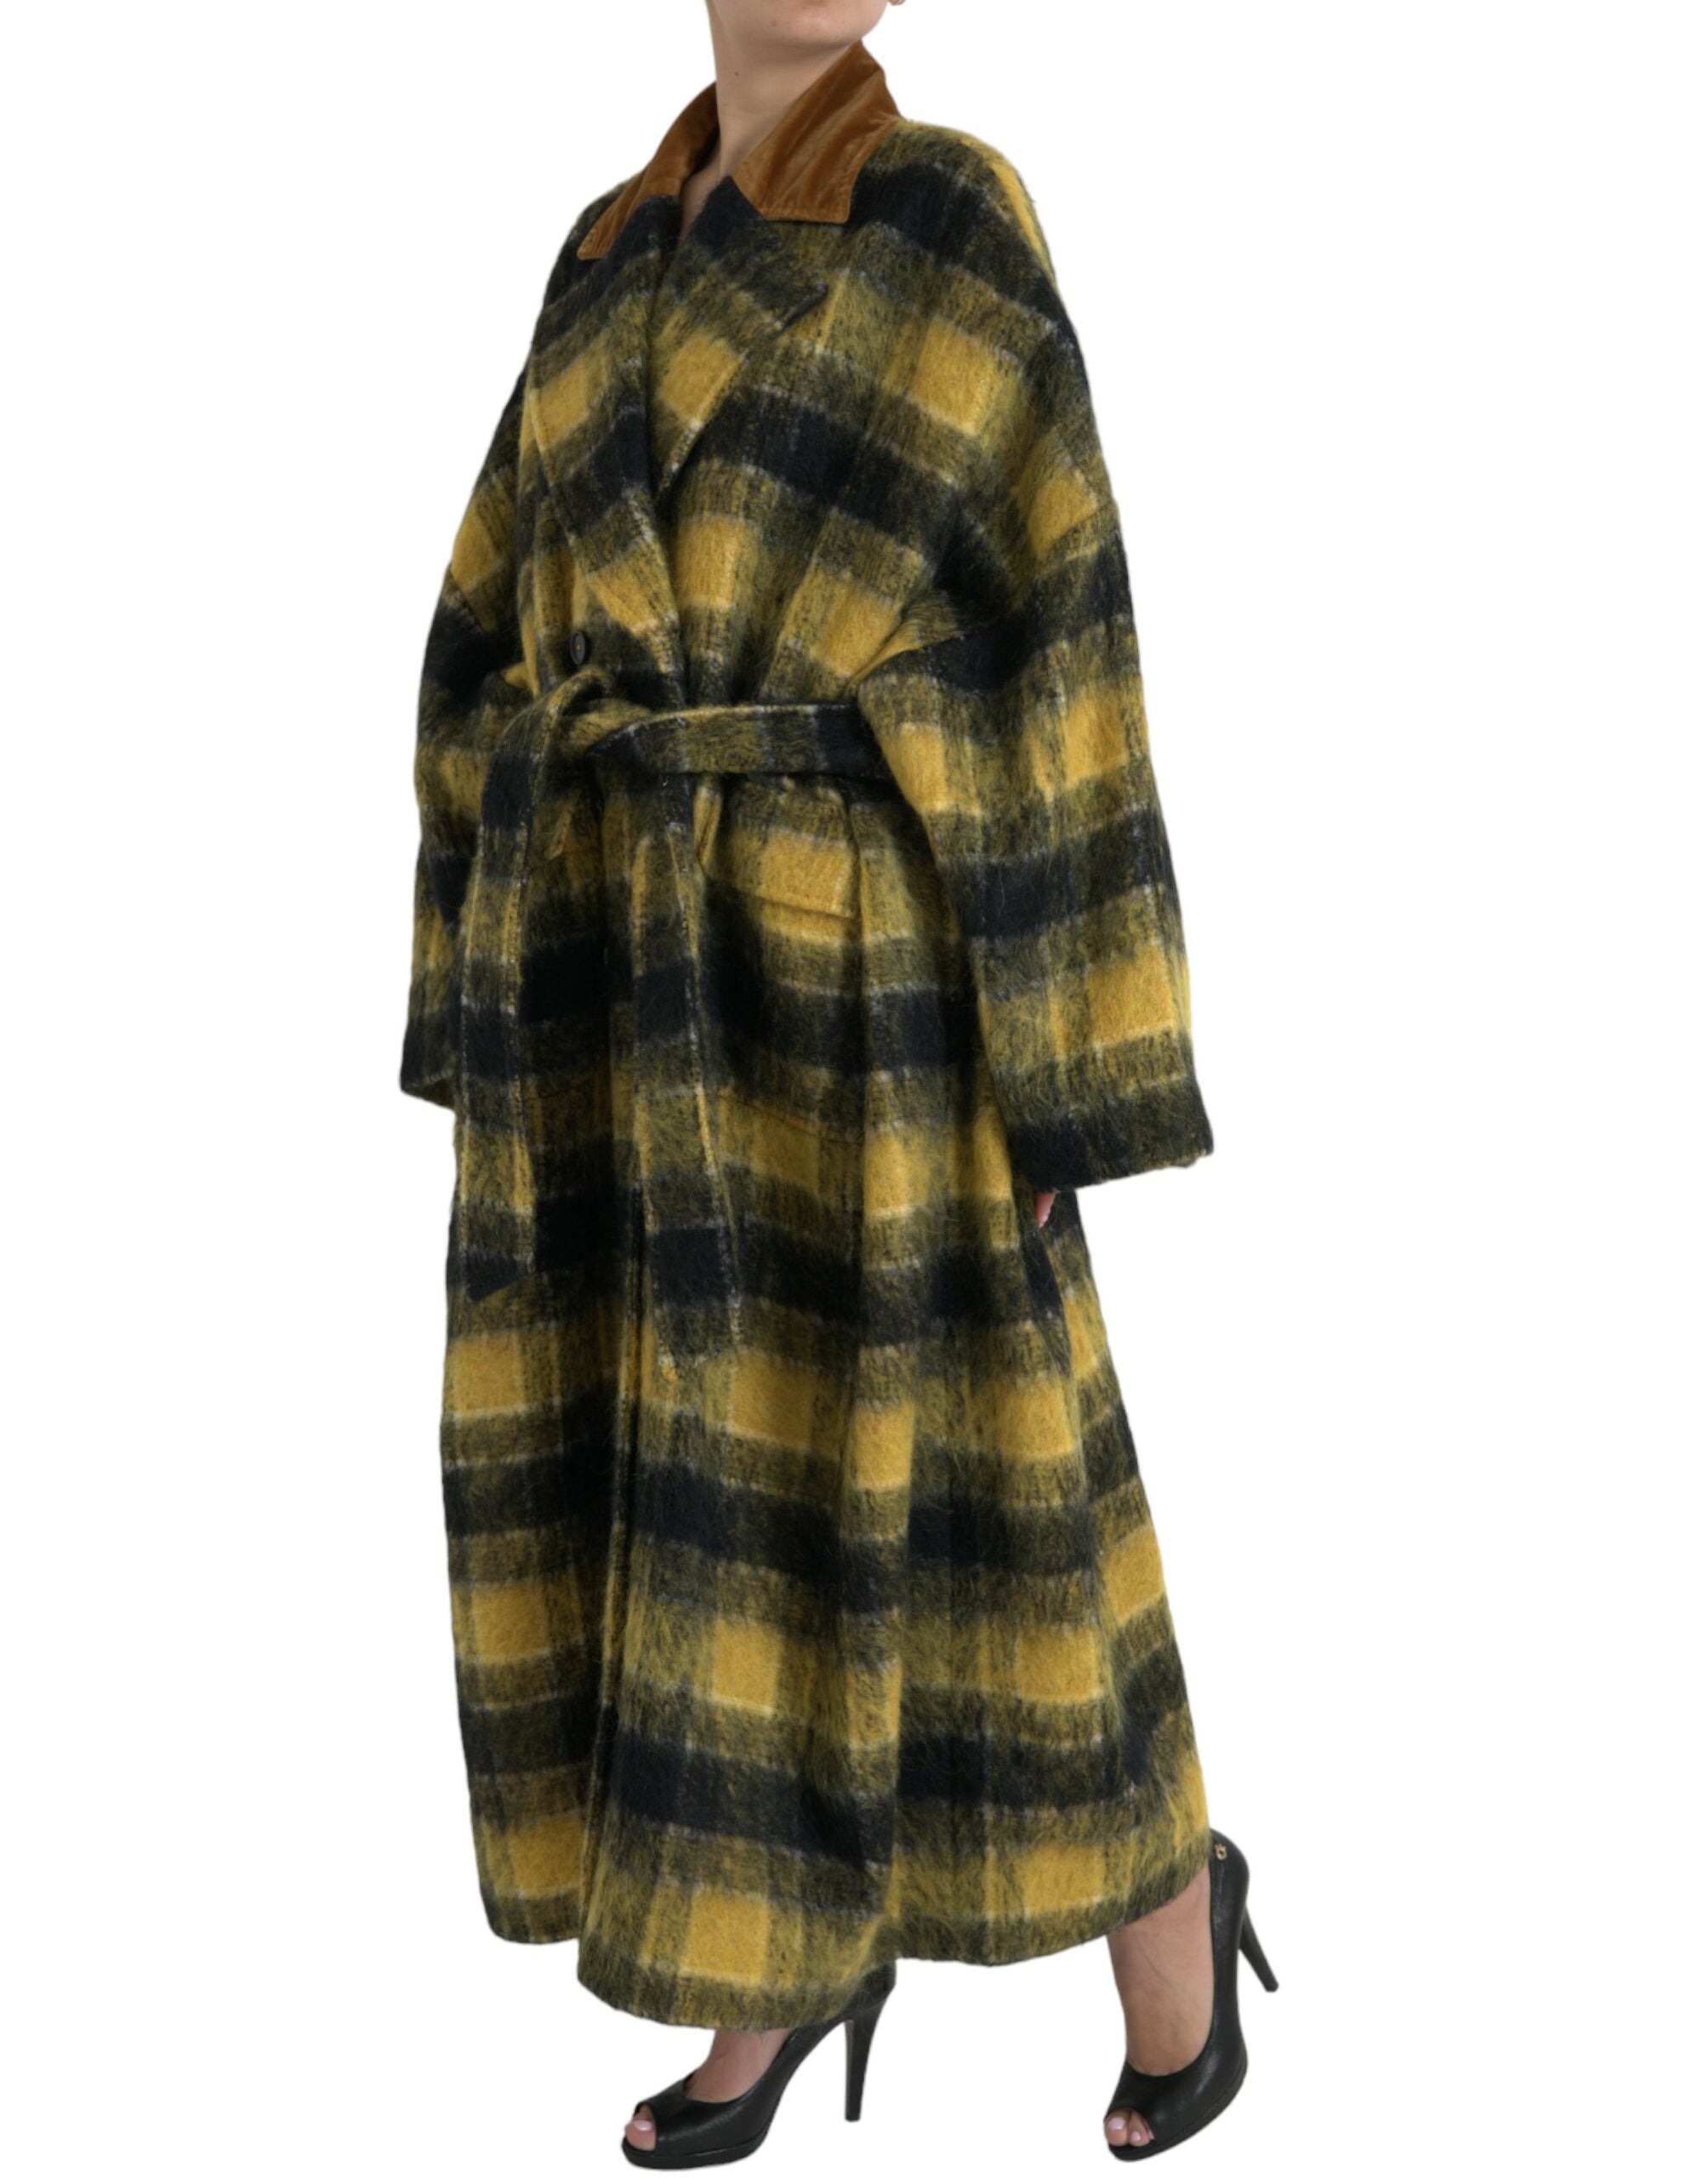 Dolce & Gabbana Chic Checkered Long Trench Coat in Sunny Yellow